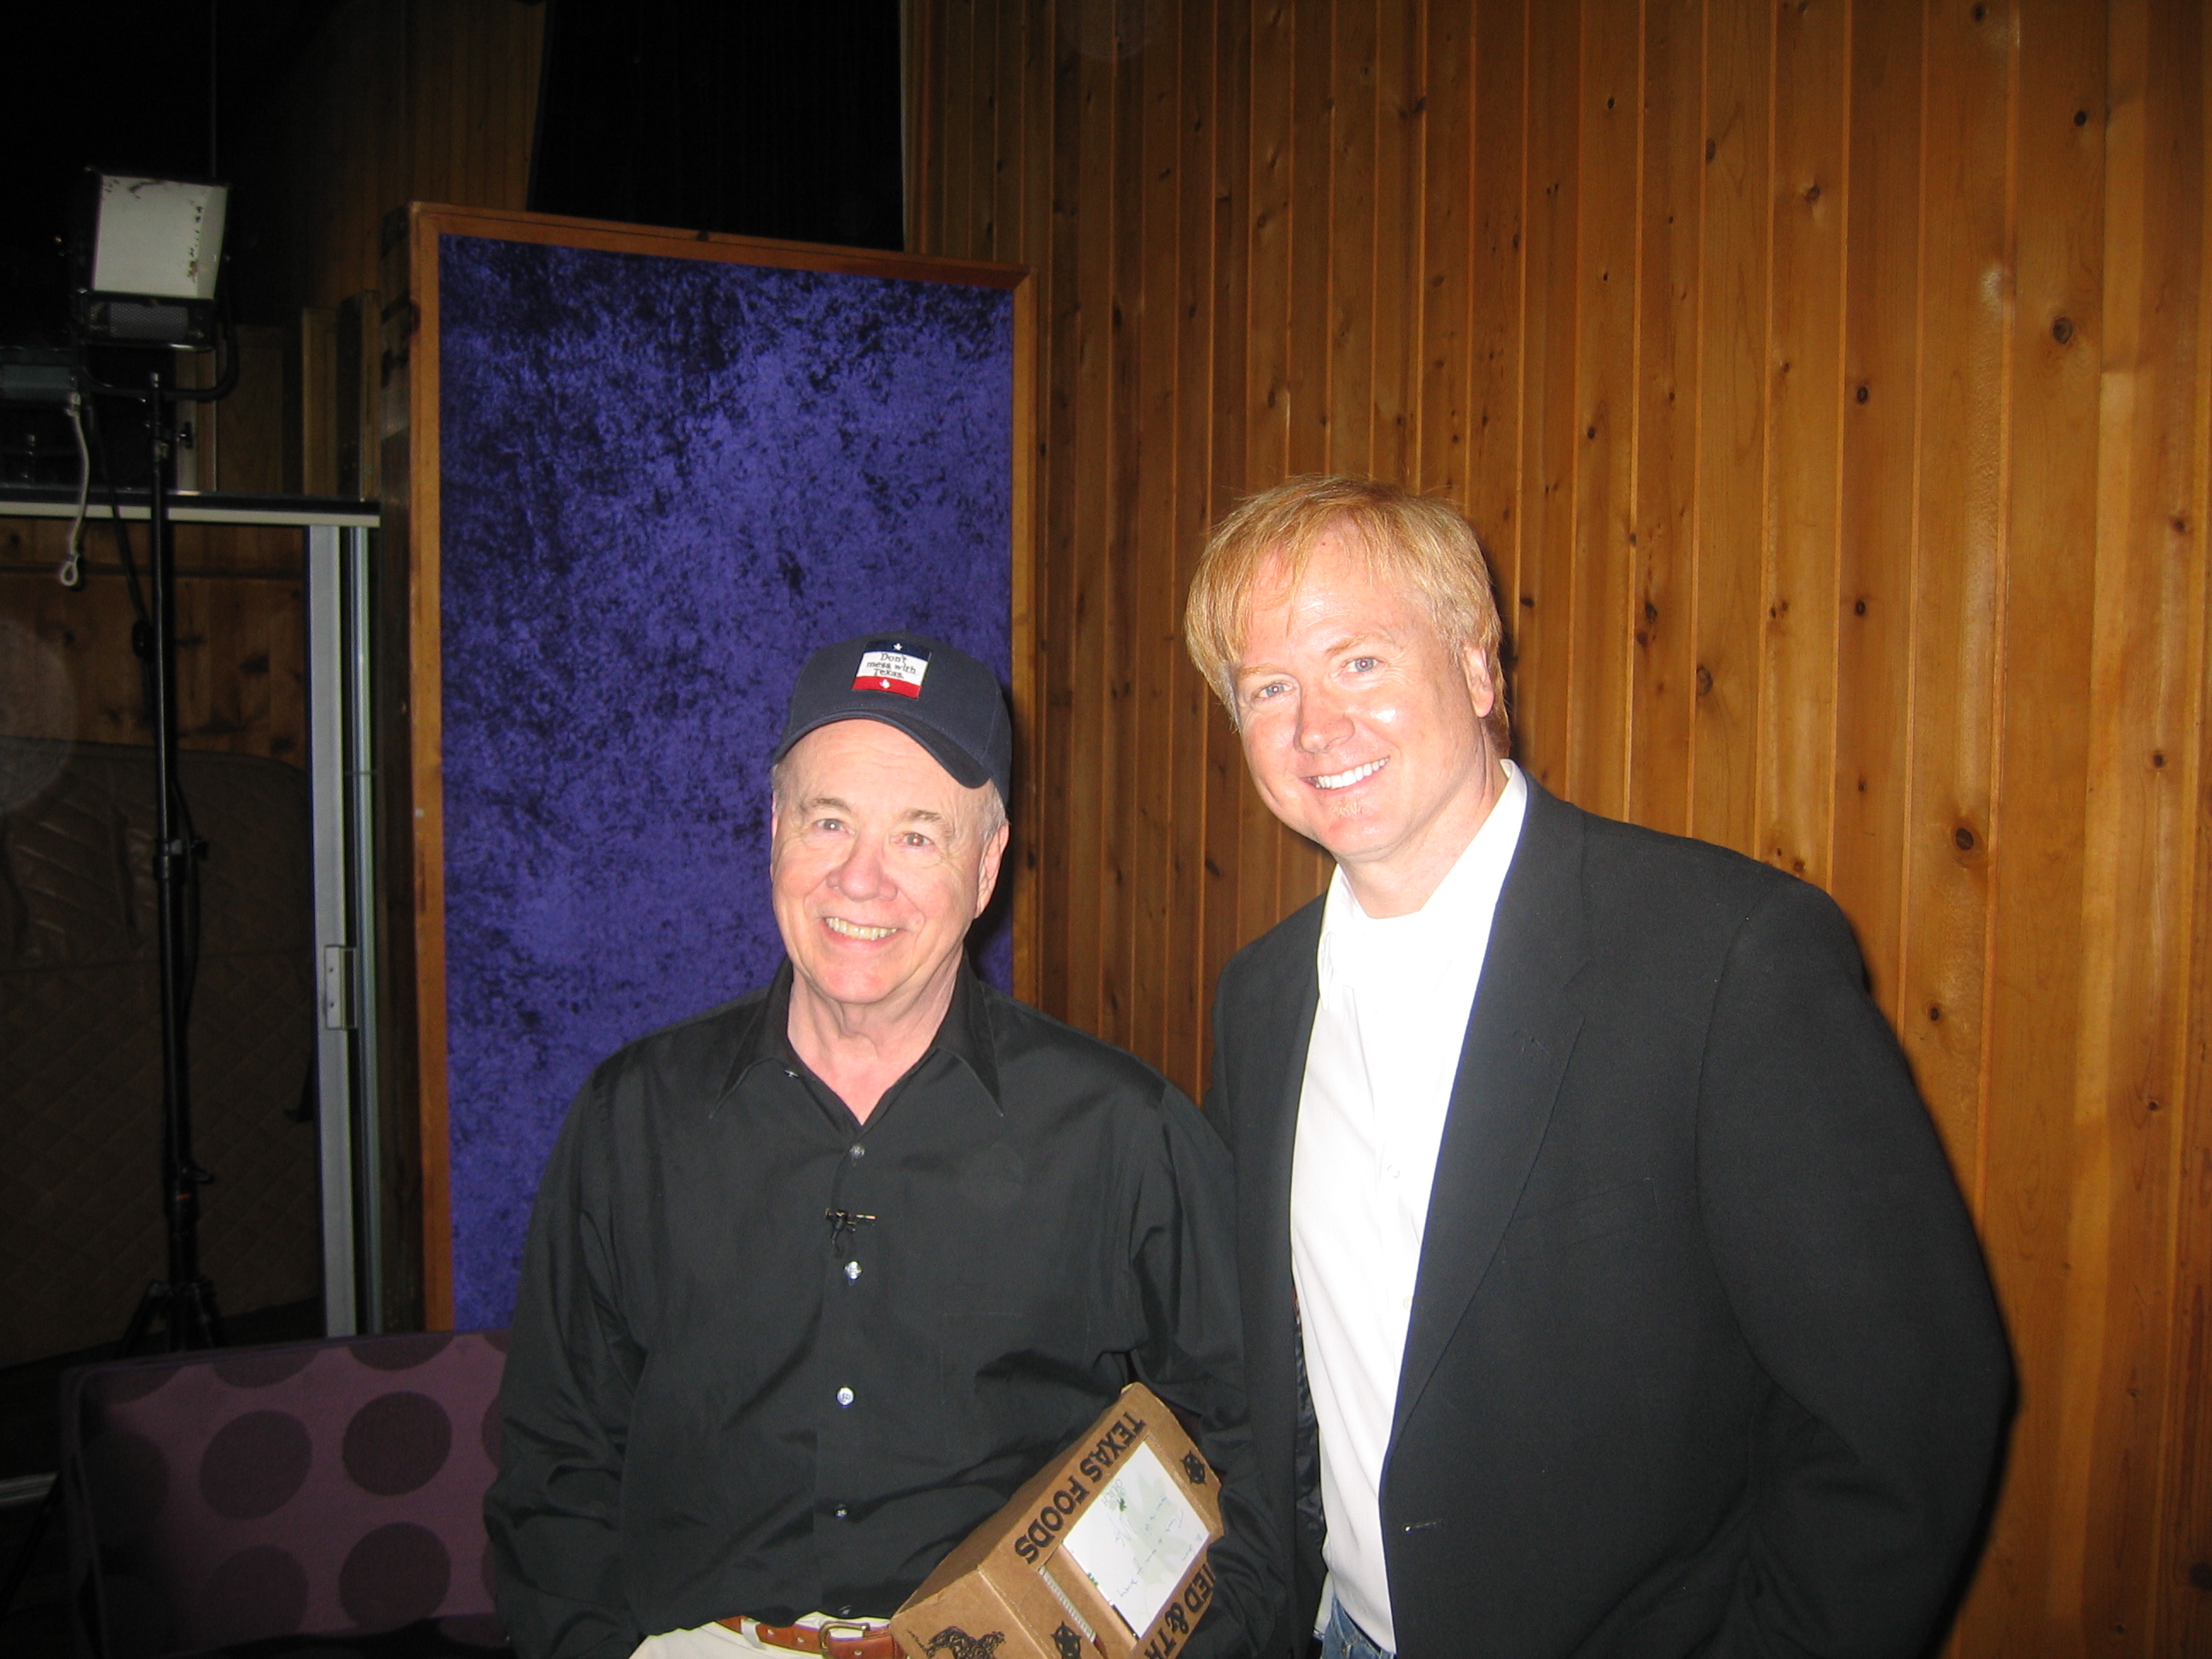 Tim Conway and Rob Pottorf at the recording session for 